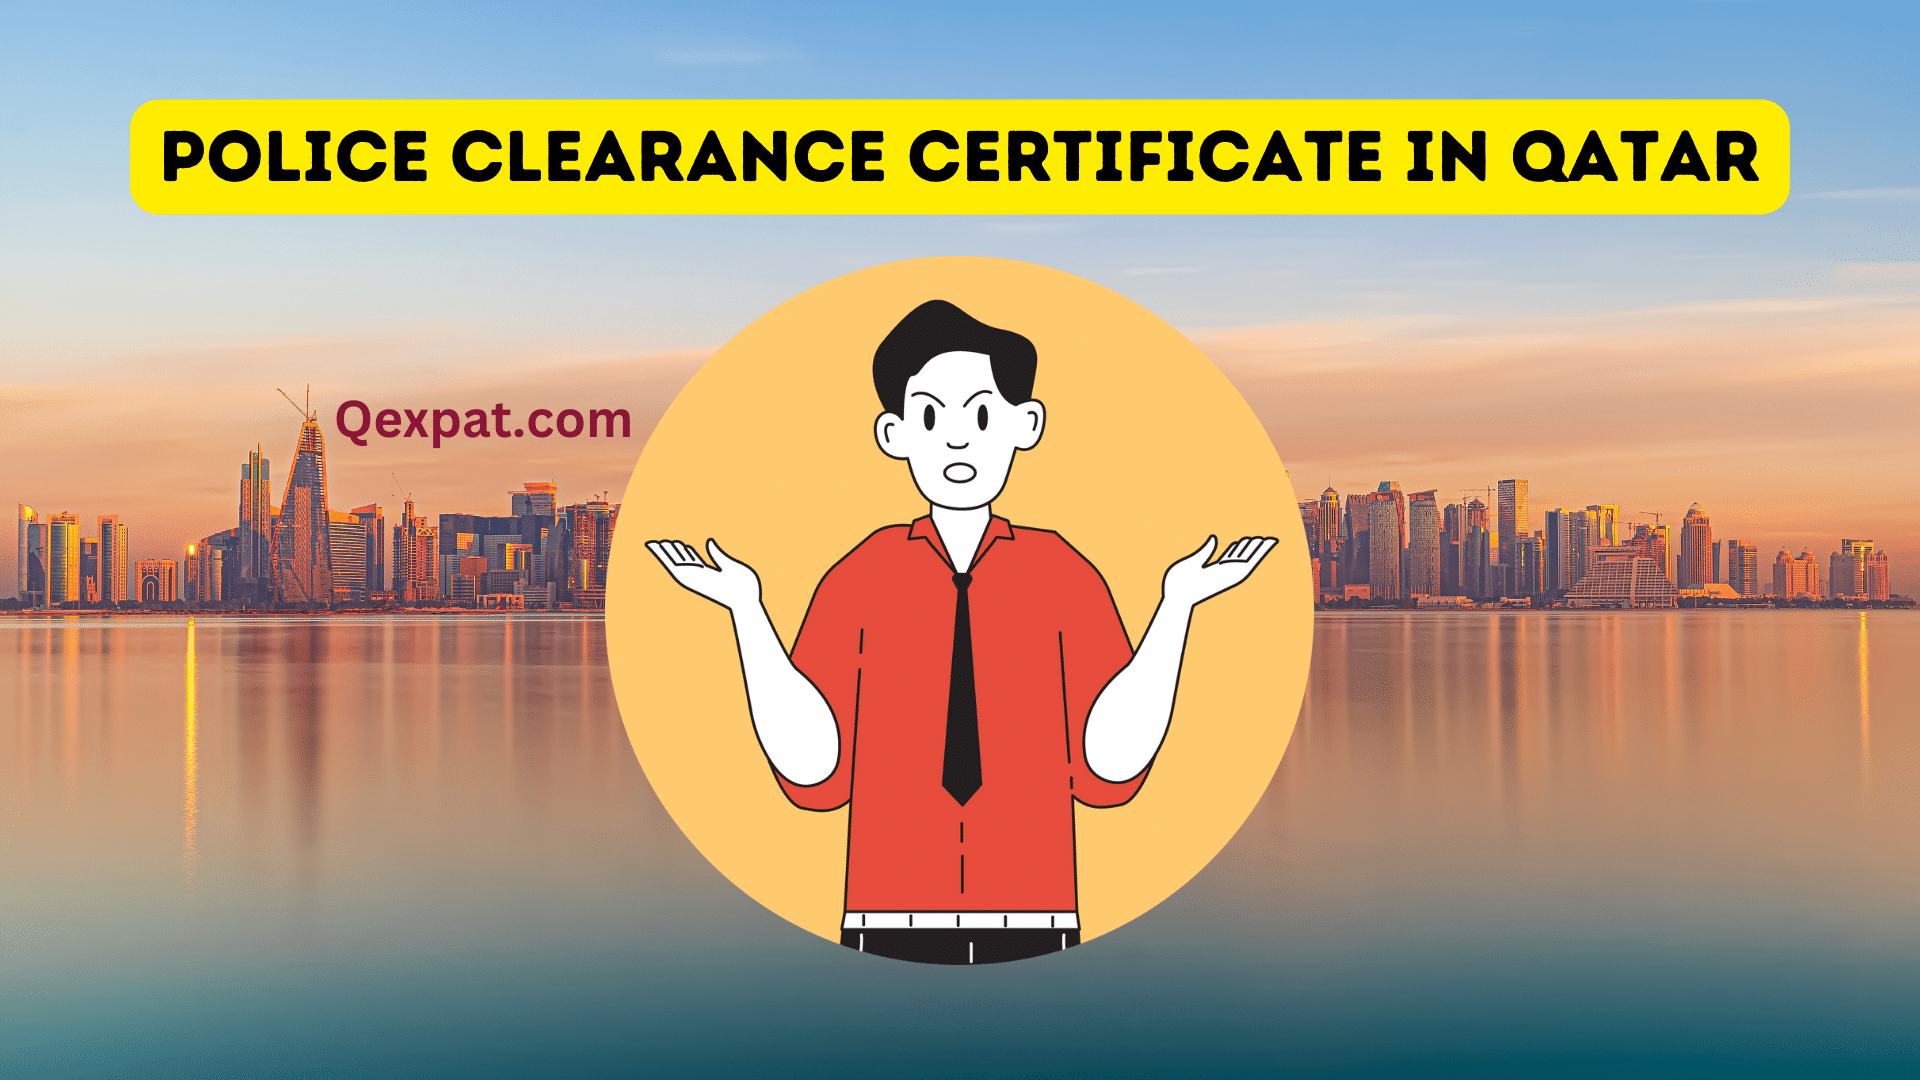 Police Clearance Certificate in Qatar